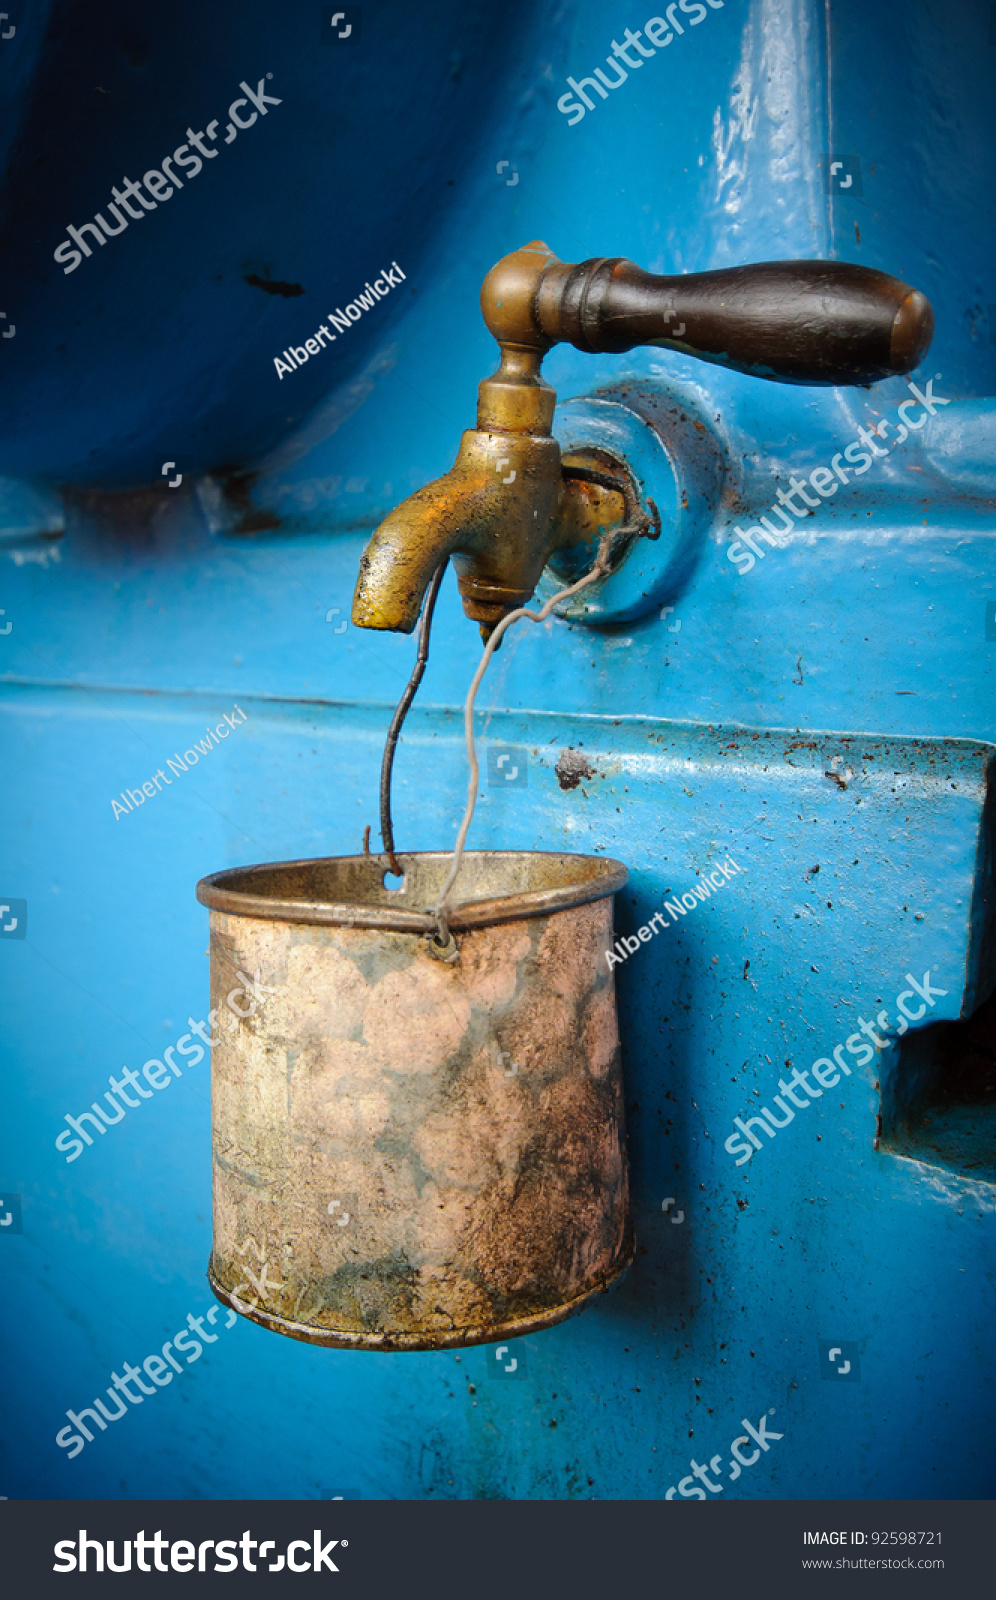 Old tap with rusty mug - water supply shortage #92598721